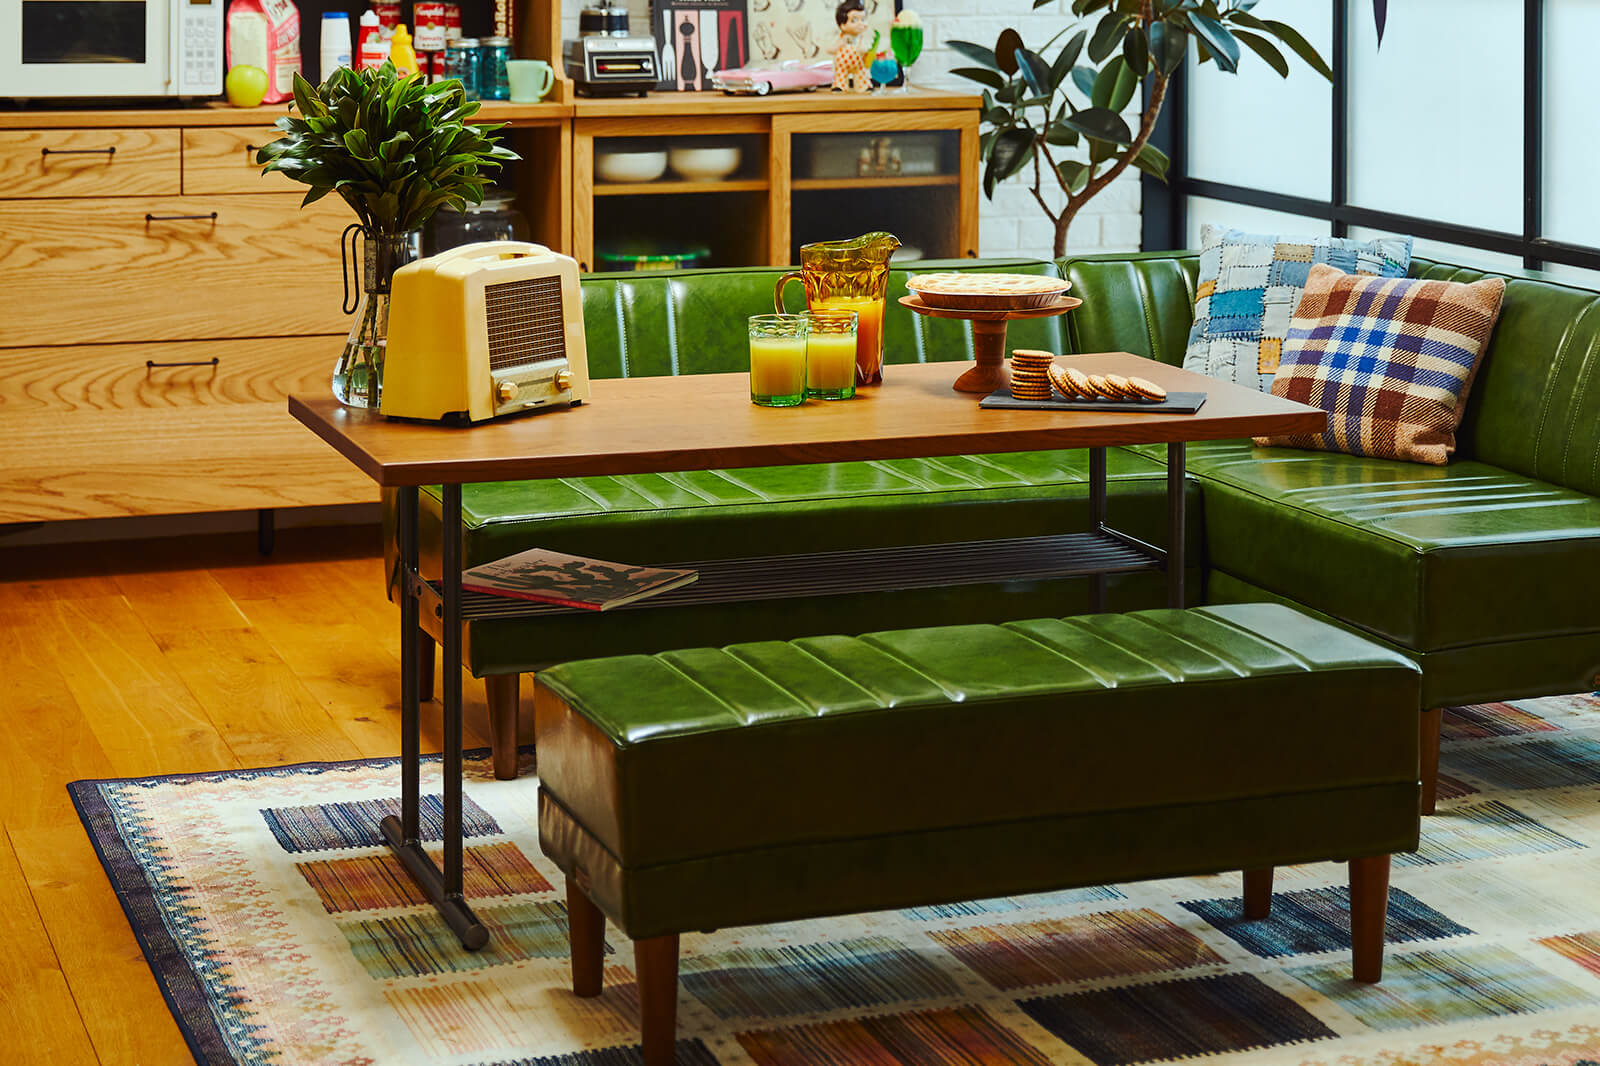 FIND THE BEST COLOR FOR SOFA. 色が変われば空間も変わる！ソファの 